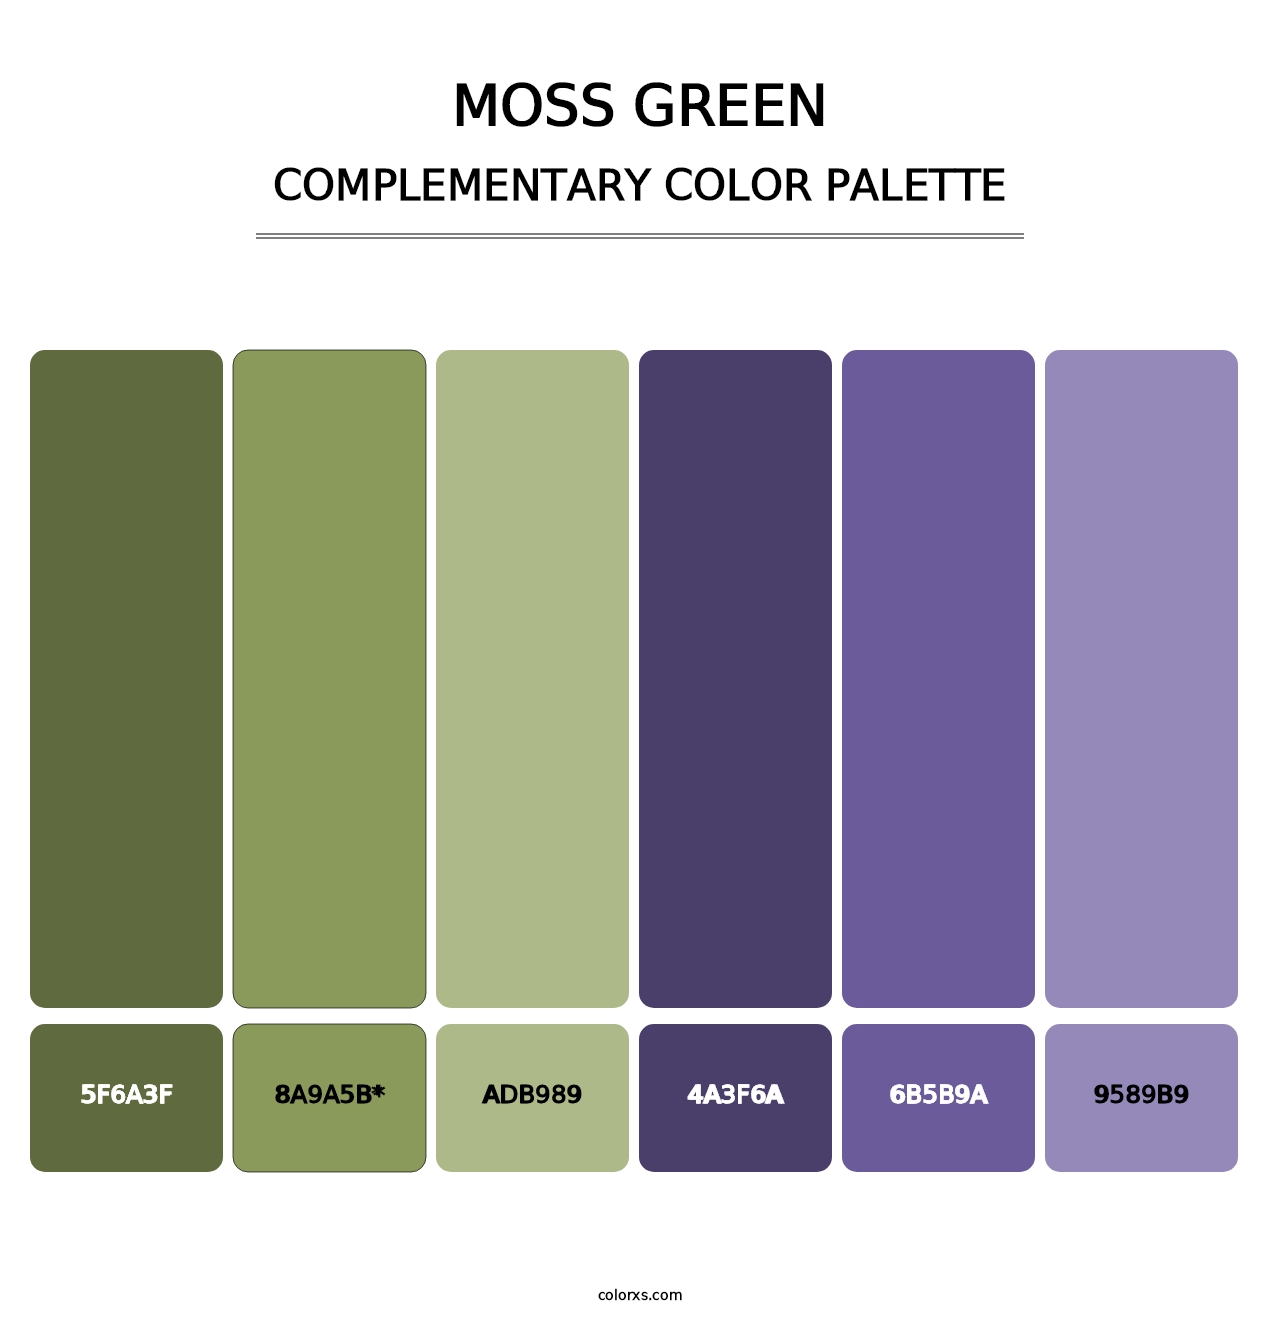 Moss Green - Complementary Color Palette